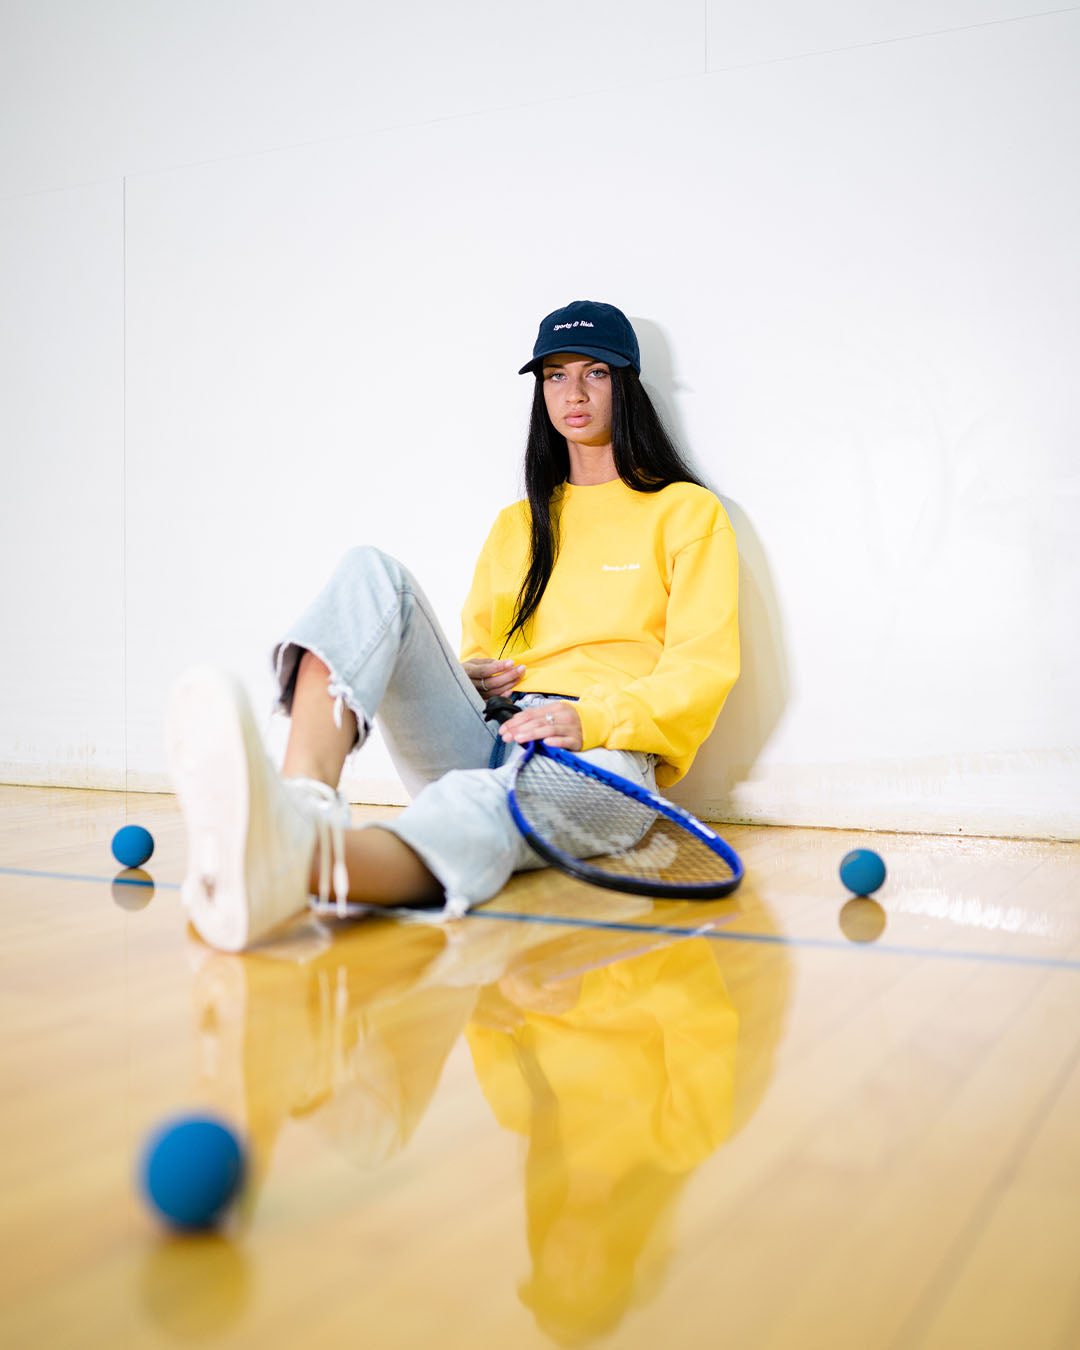 Sporty and Rich by Emily Oberg - Cheap Urlfreeze Jordan outlet